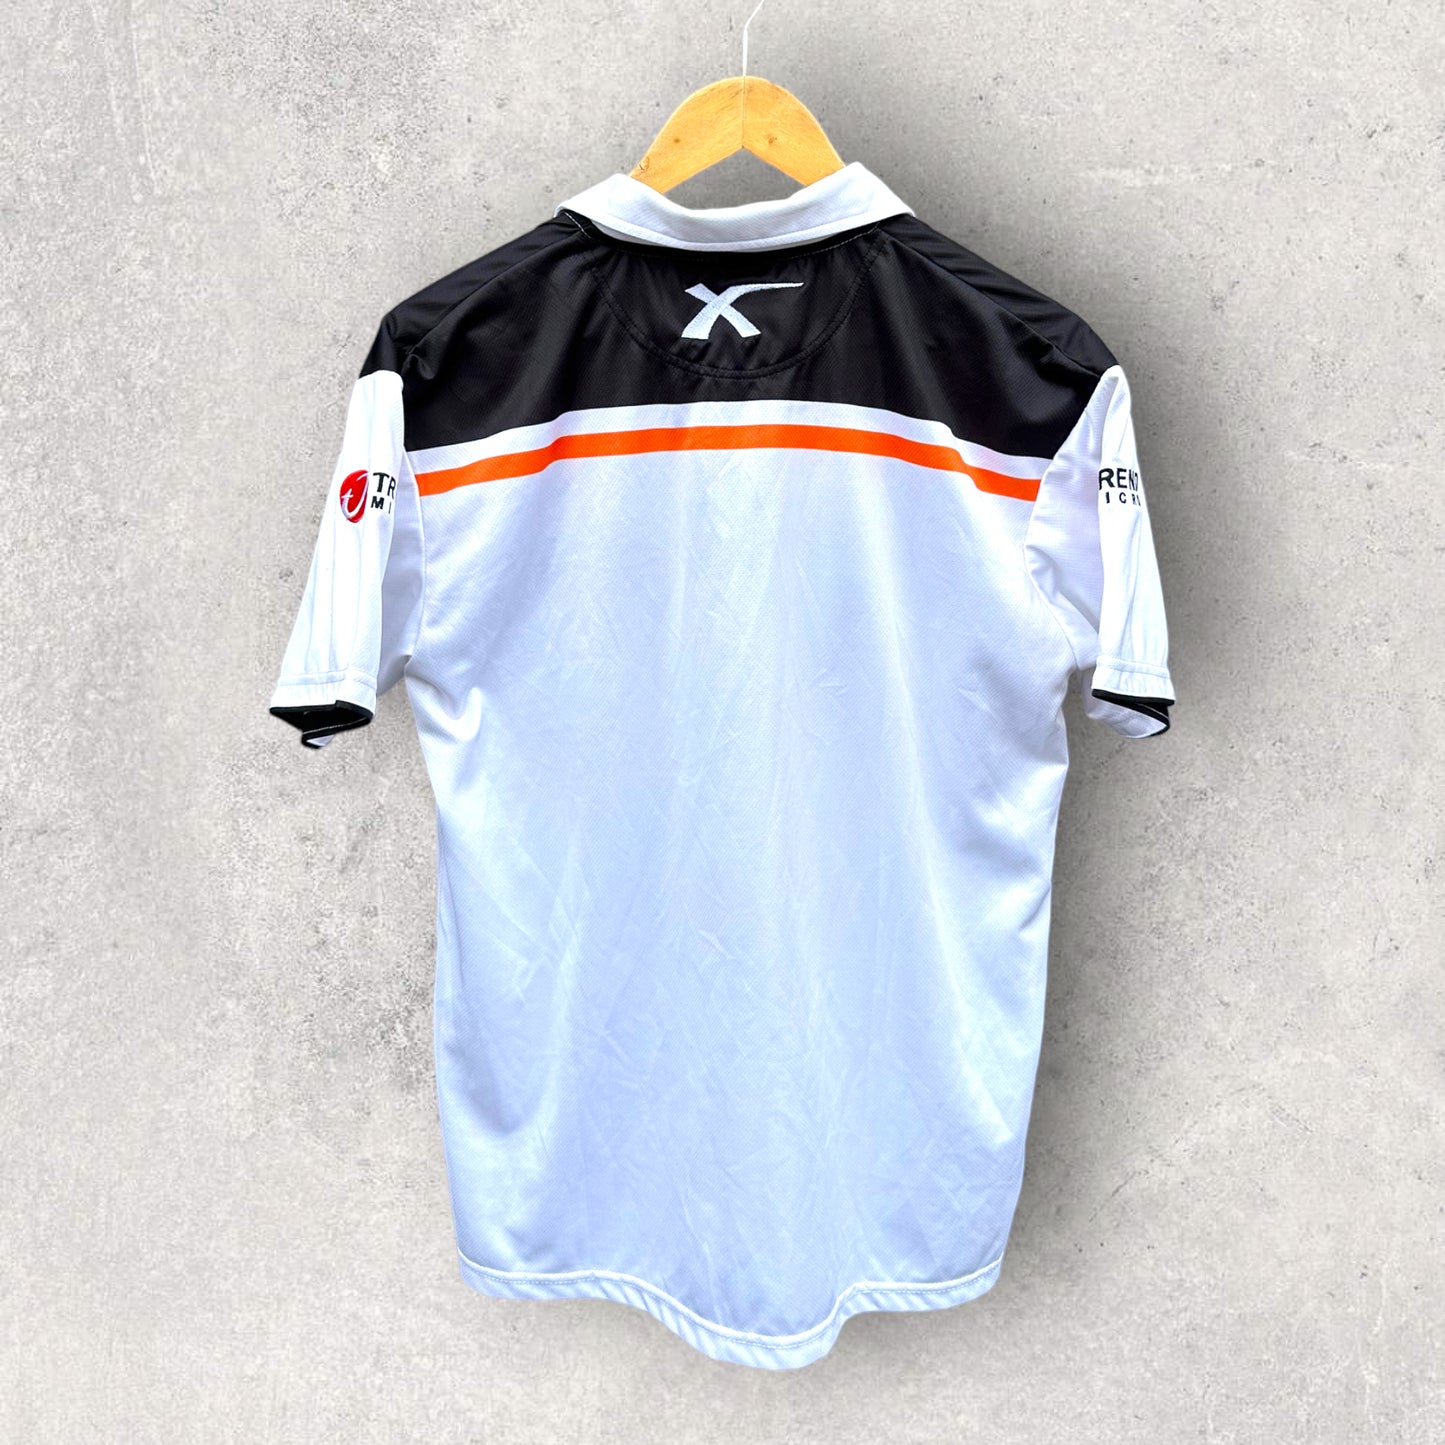 WESTS TIGERS X BLADES POLO SHIRT